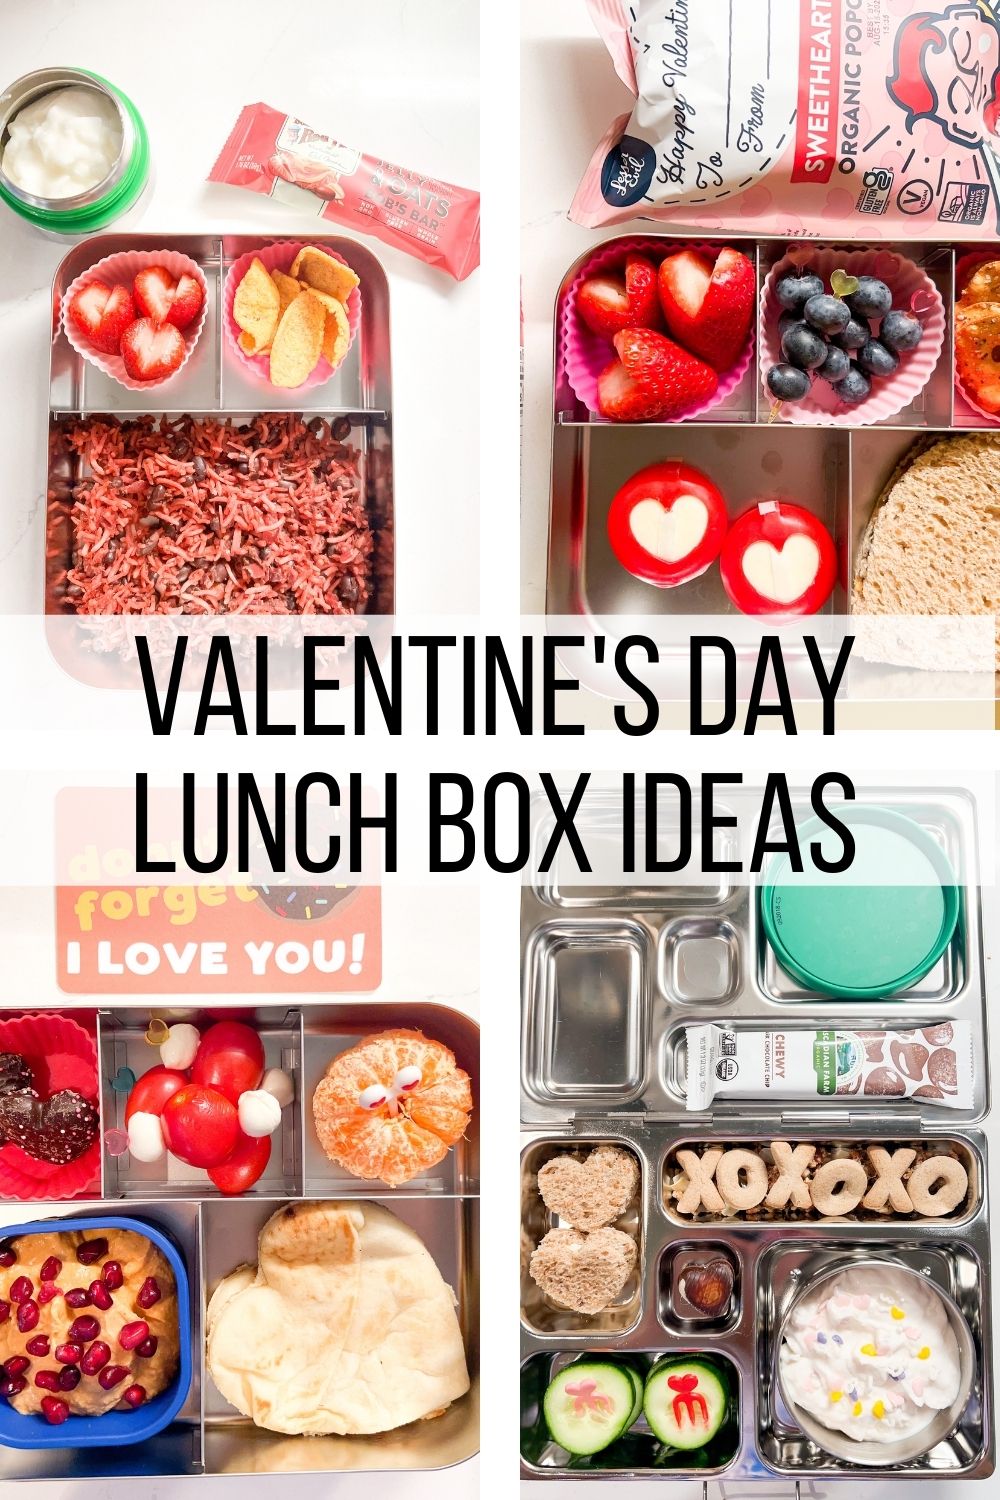 https://www.cookingcurries.com/wp-content/uploads/2022/02/Valentines-Day-Lunch-Box-Ideas.jpg